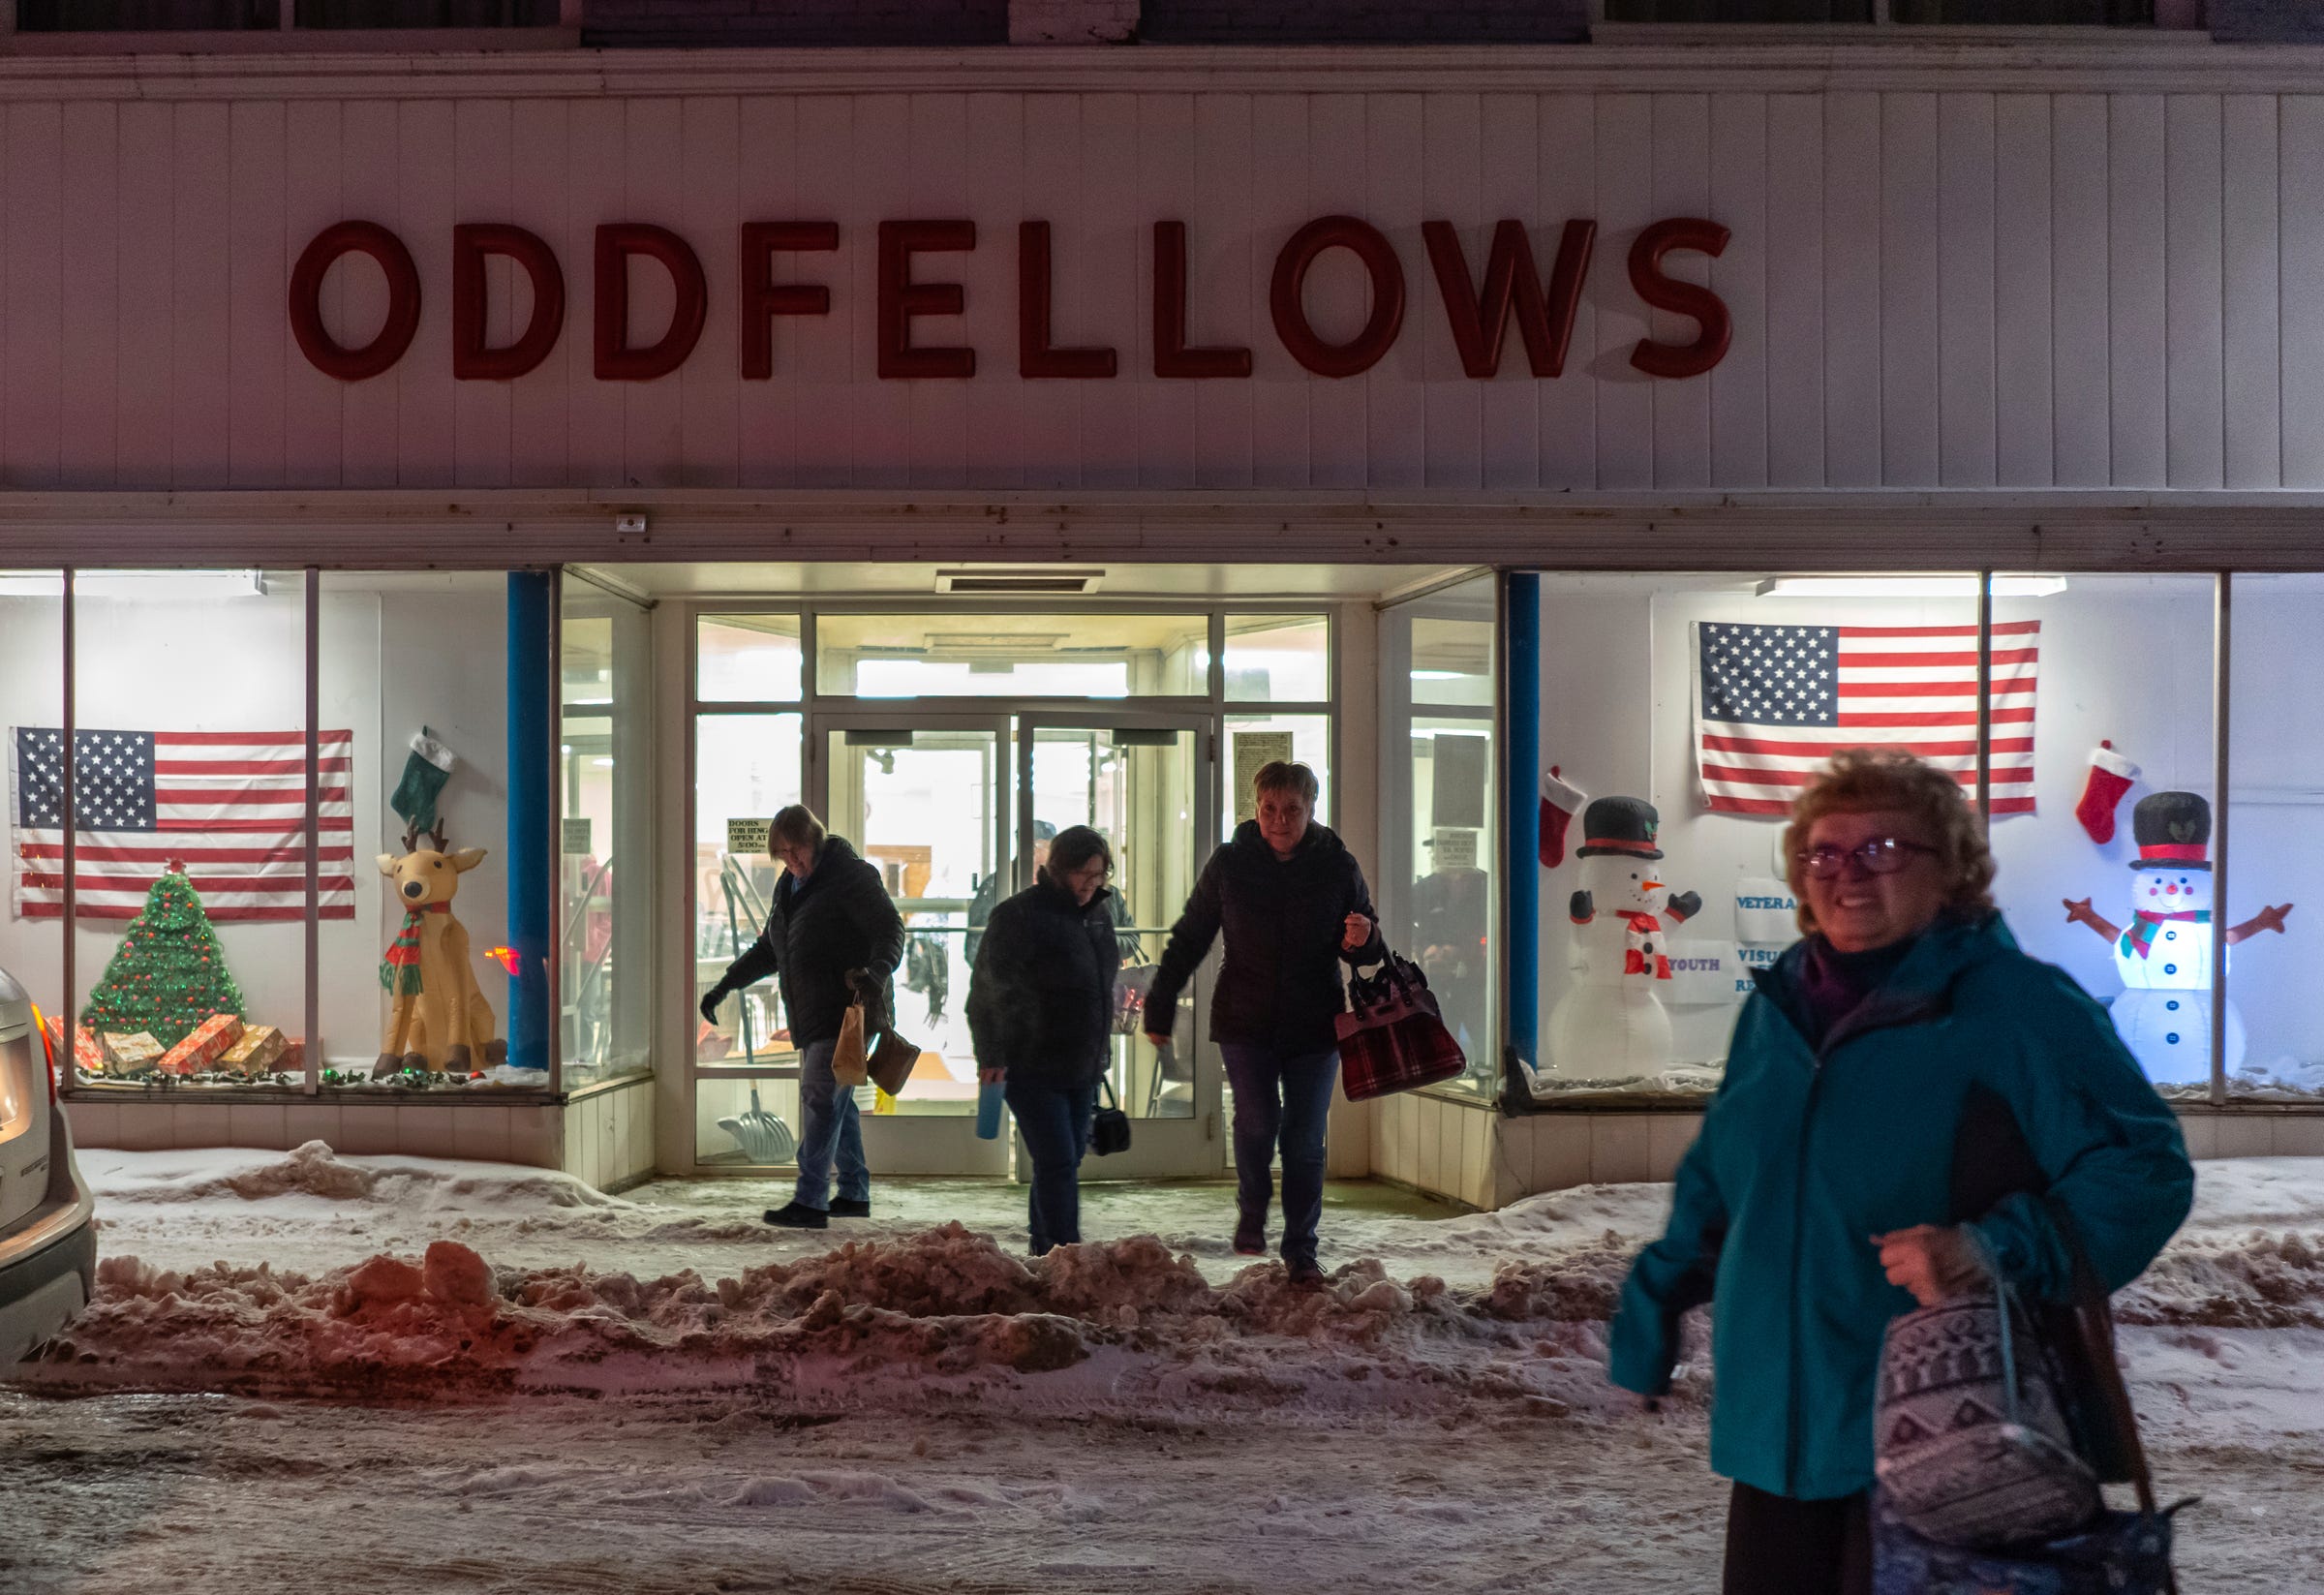 A group of women heads out after a night of bingo at the Odd Fellows building in Ishpeming on Friday, Feb. 10, 2023, in Michigan's Upper Peninsula.